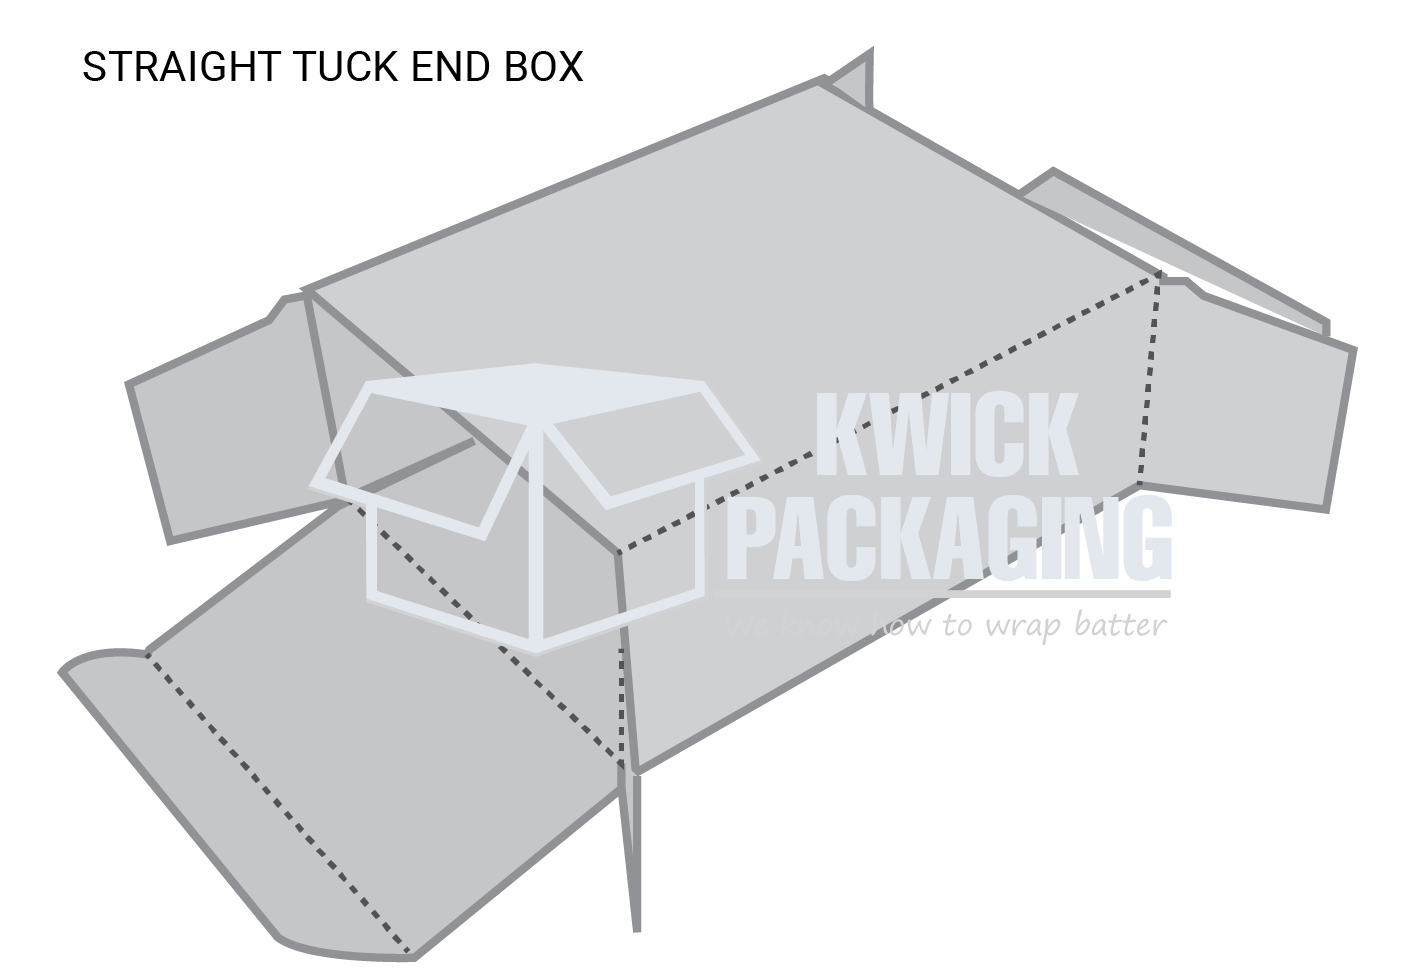 Straight_tuck_box_-_Kwick_Packaging.png